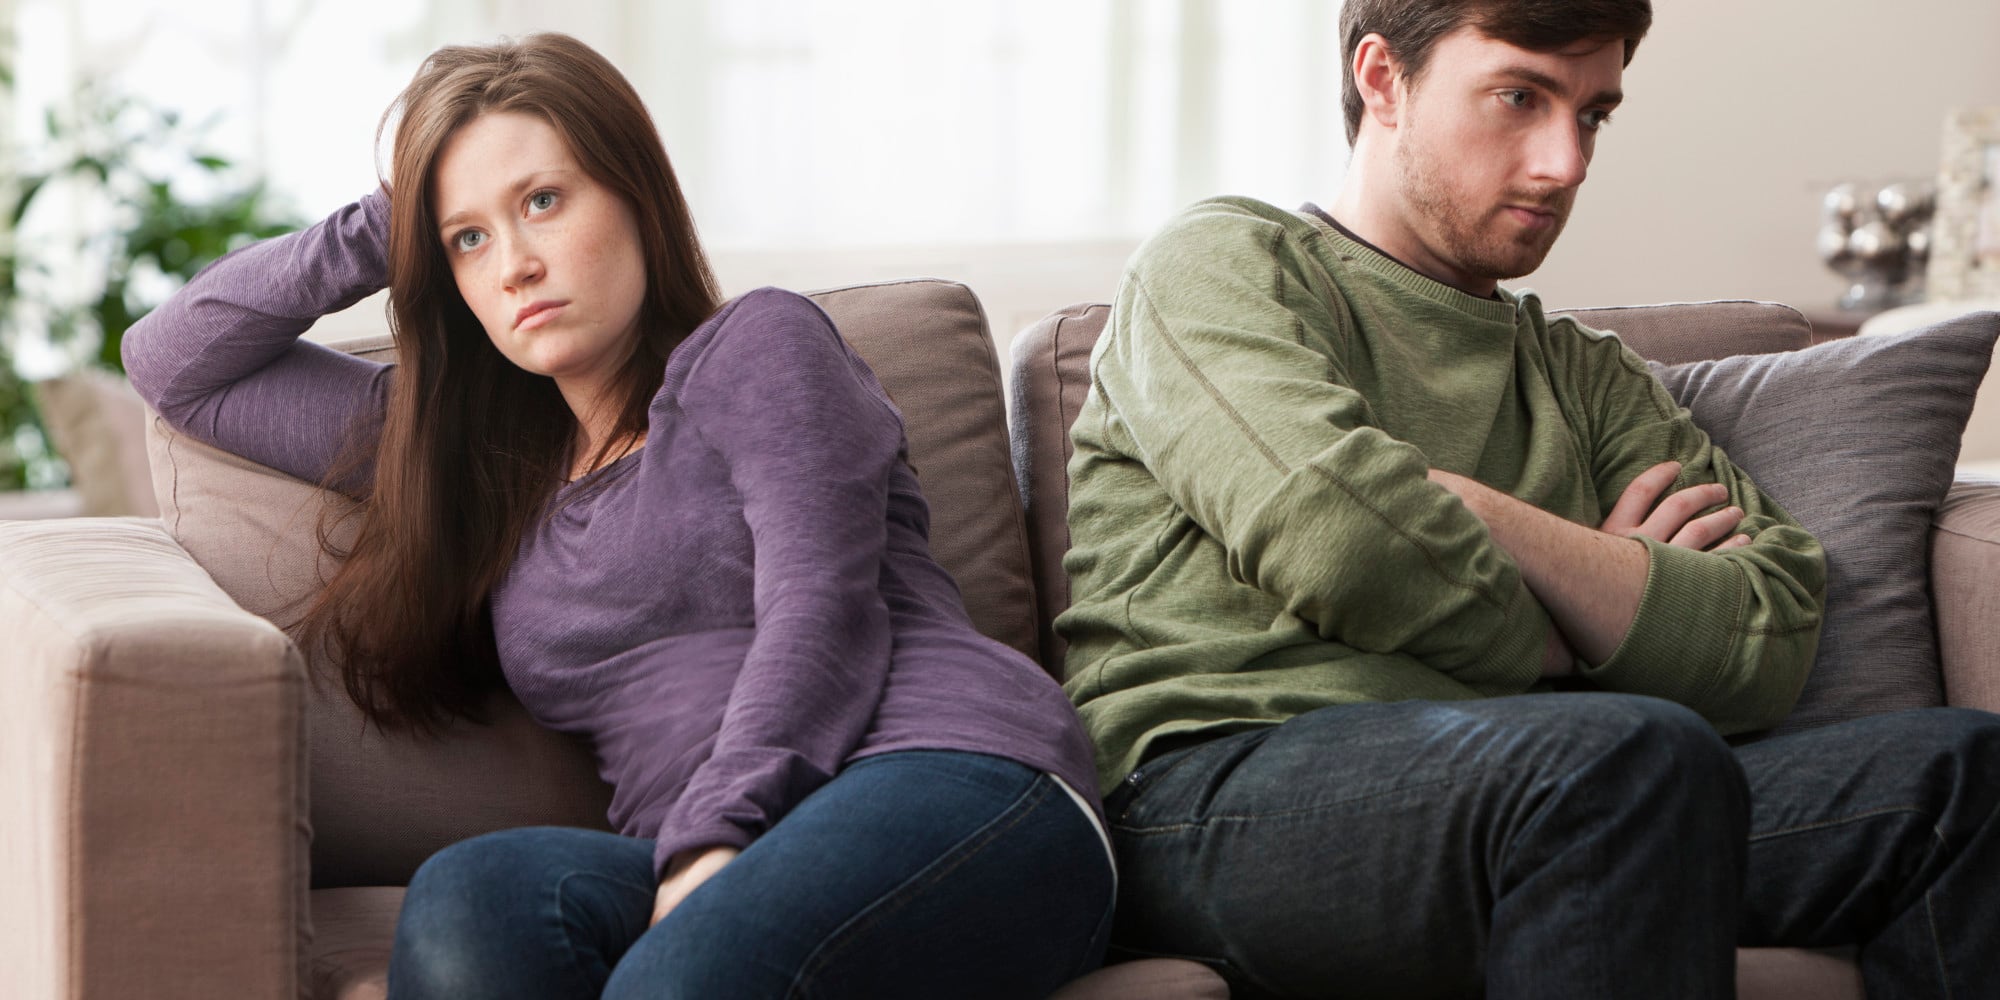 Fear Of Breakup May End Your Romantic Relationship